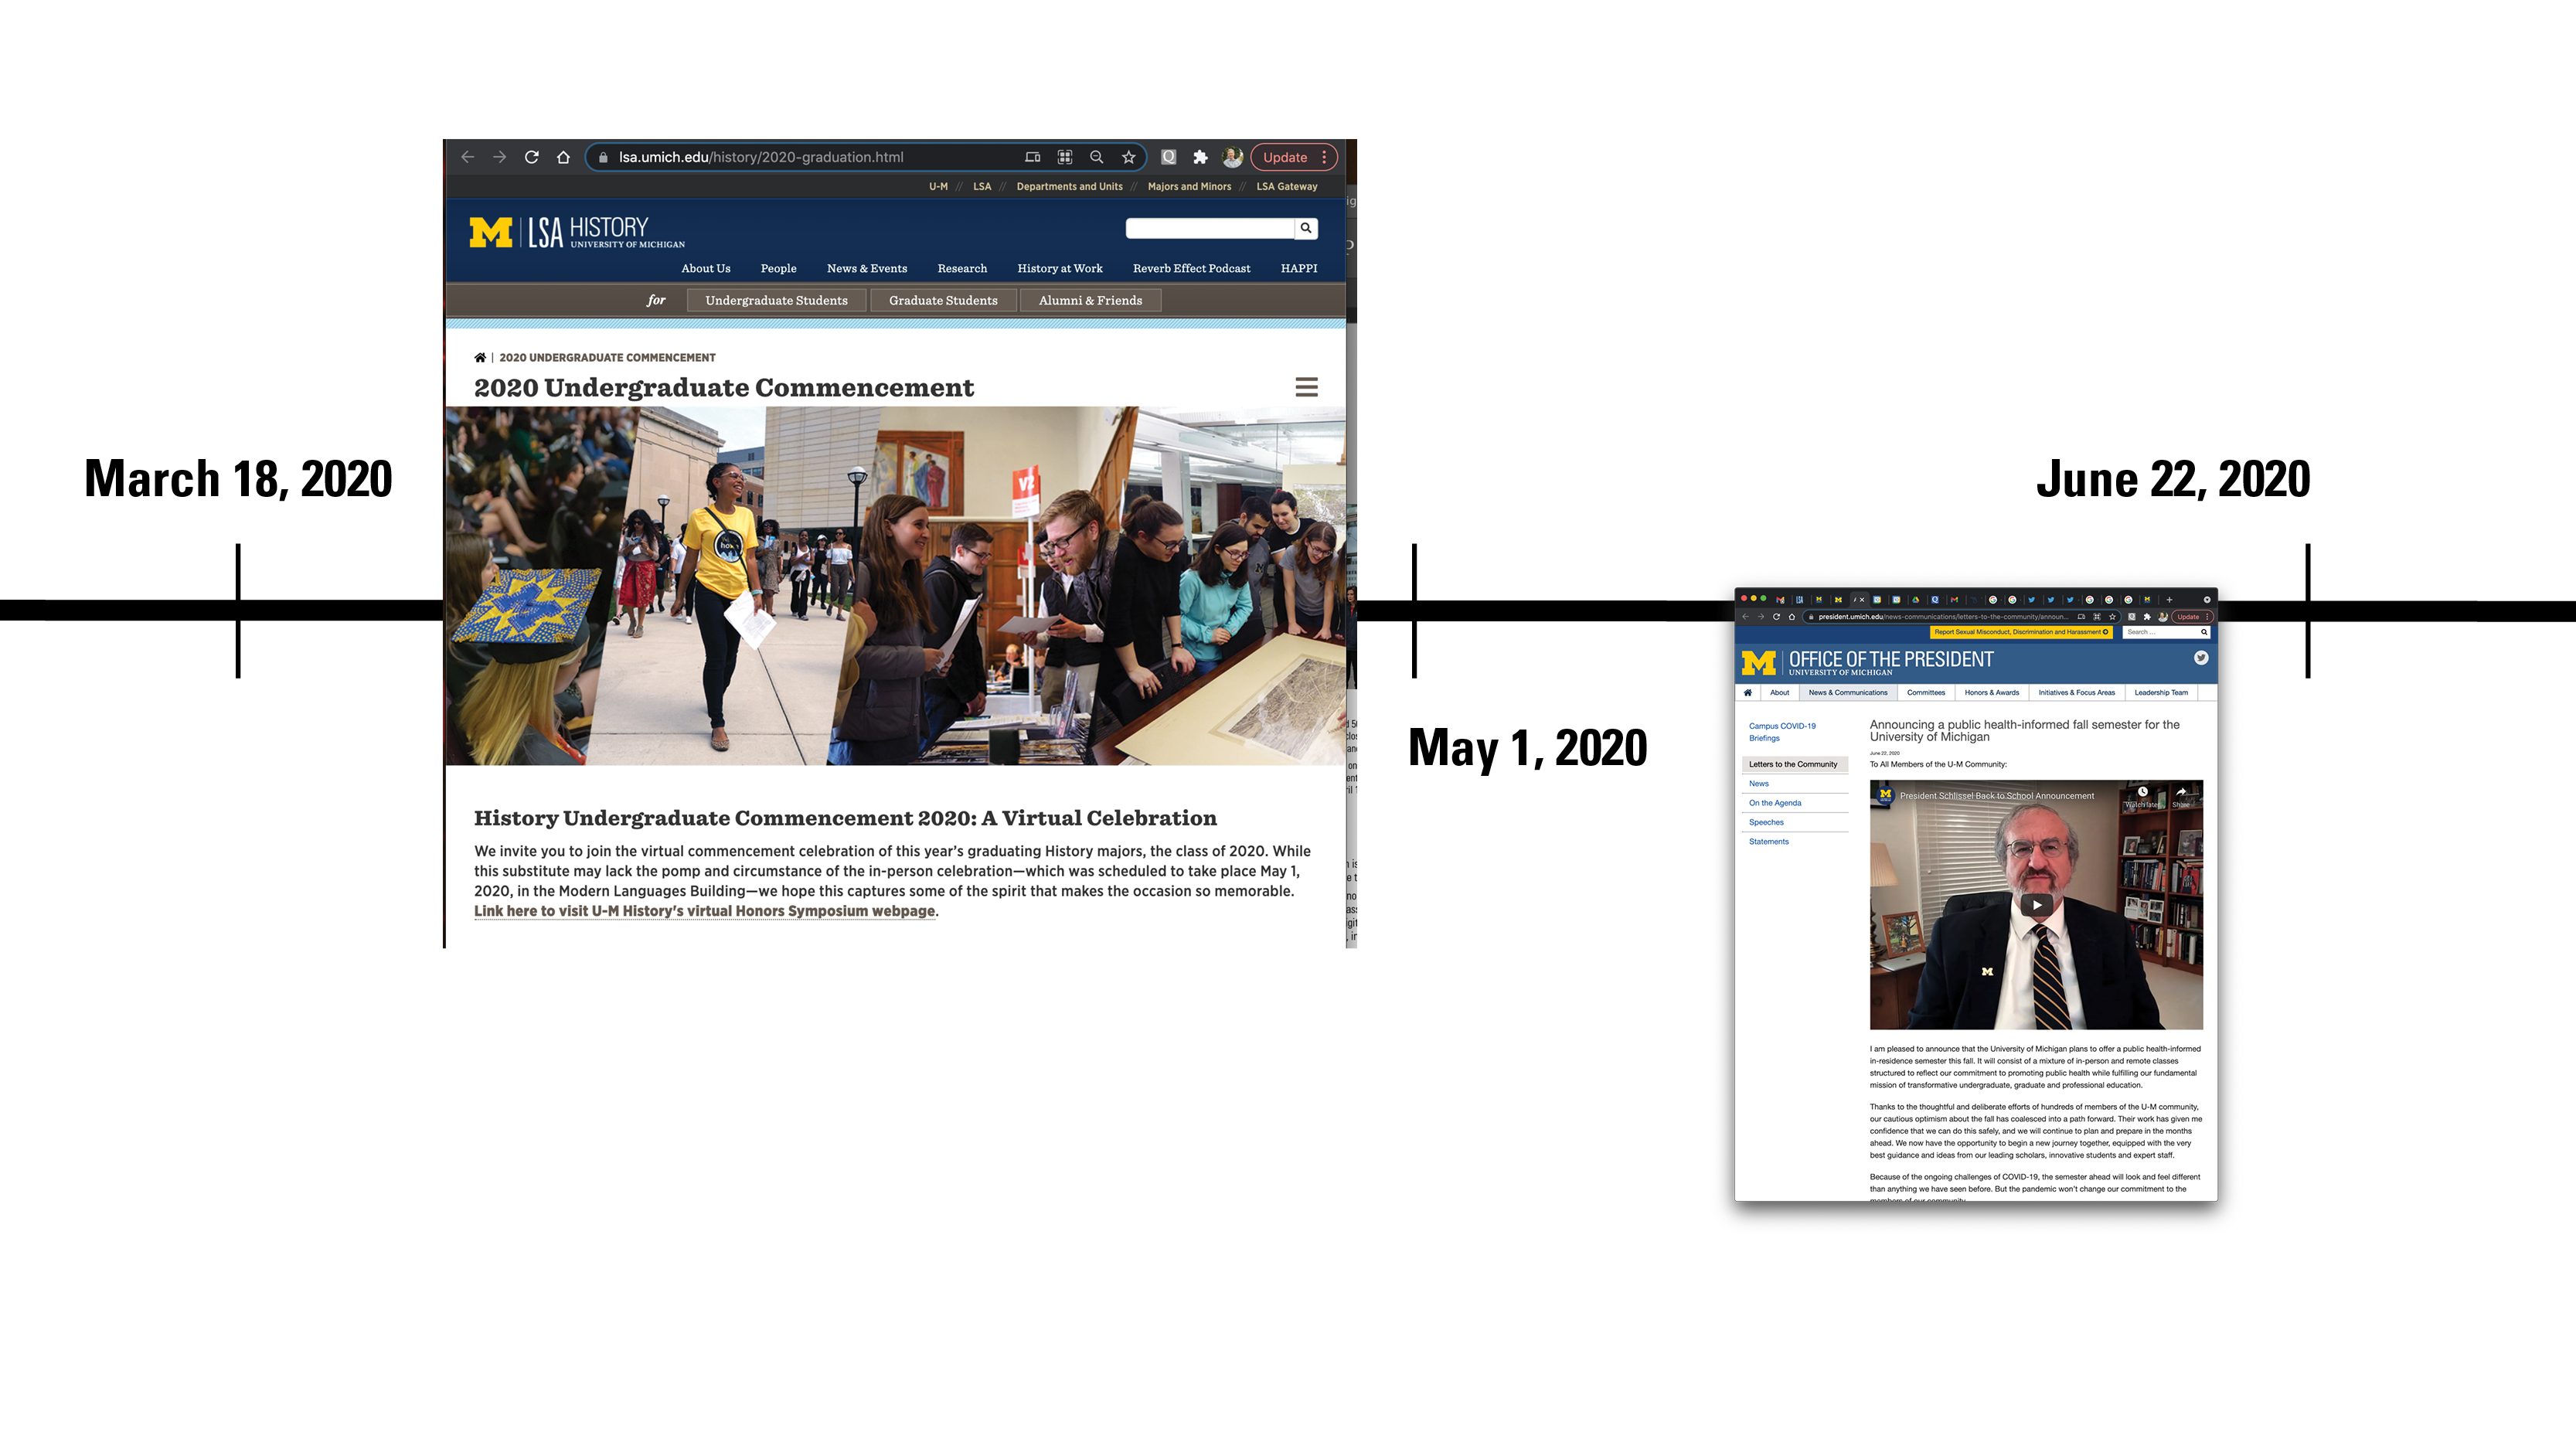 March 18, 2020: First COVID-19 deaths confirmed in Michigan; May 1, 2020: Total Michigan Cases: 42,356 Total Michigan Deaths: 3,866 U-M celebrates a remote Spring Commencement, and U-M History publishes a virtual graduation website; June 22, 2020: Total Michigan Cases: 61,409 Total Michigan Deaths: 5,853 President Schlissel announces a “public health-informed fall semester” for U-M. Most 2020-21 classes were held virtually.